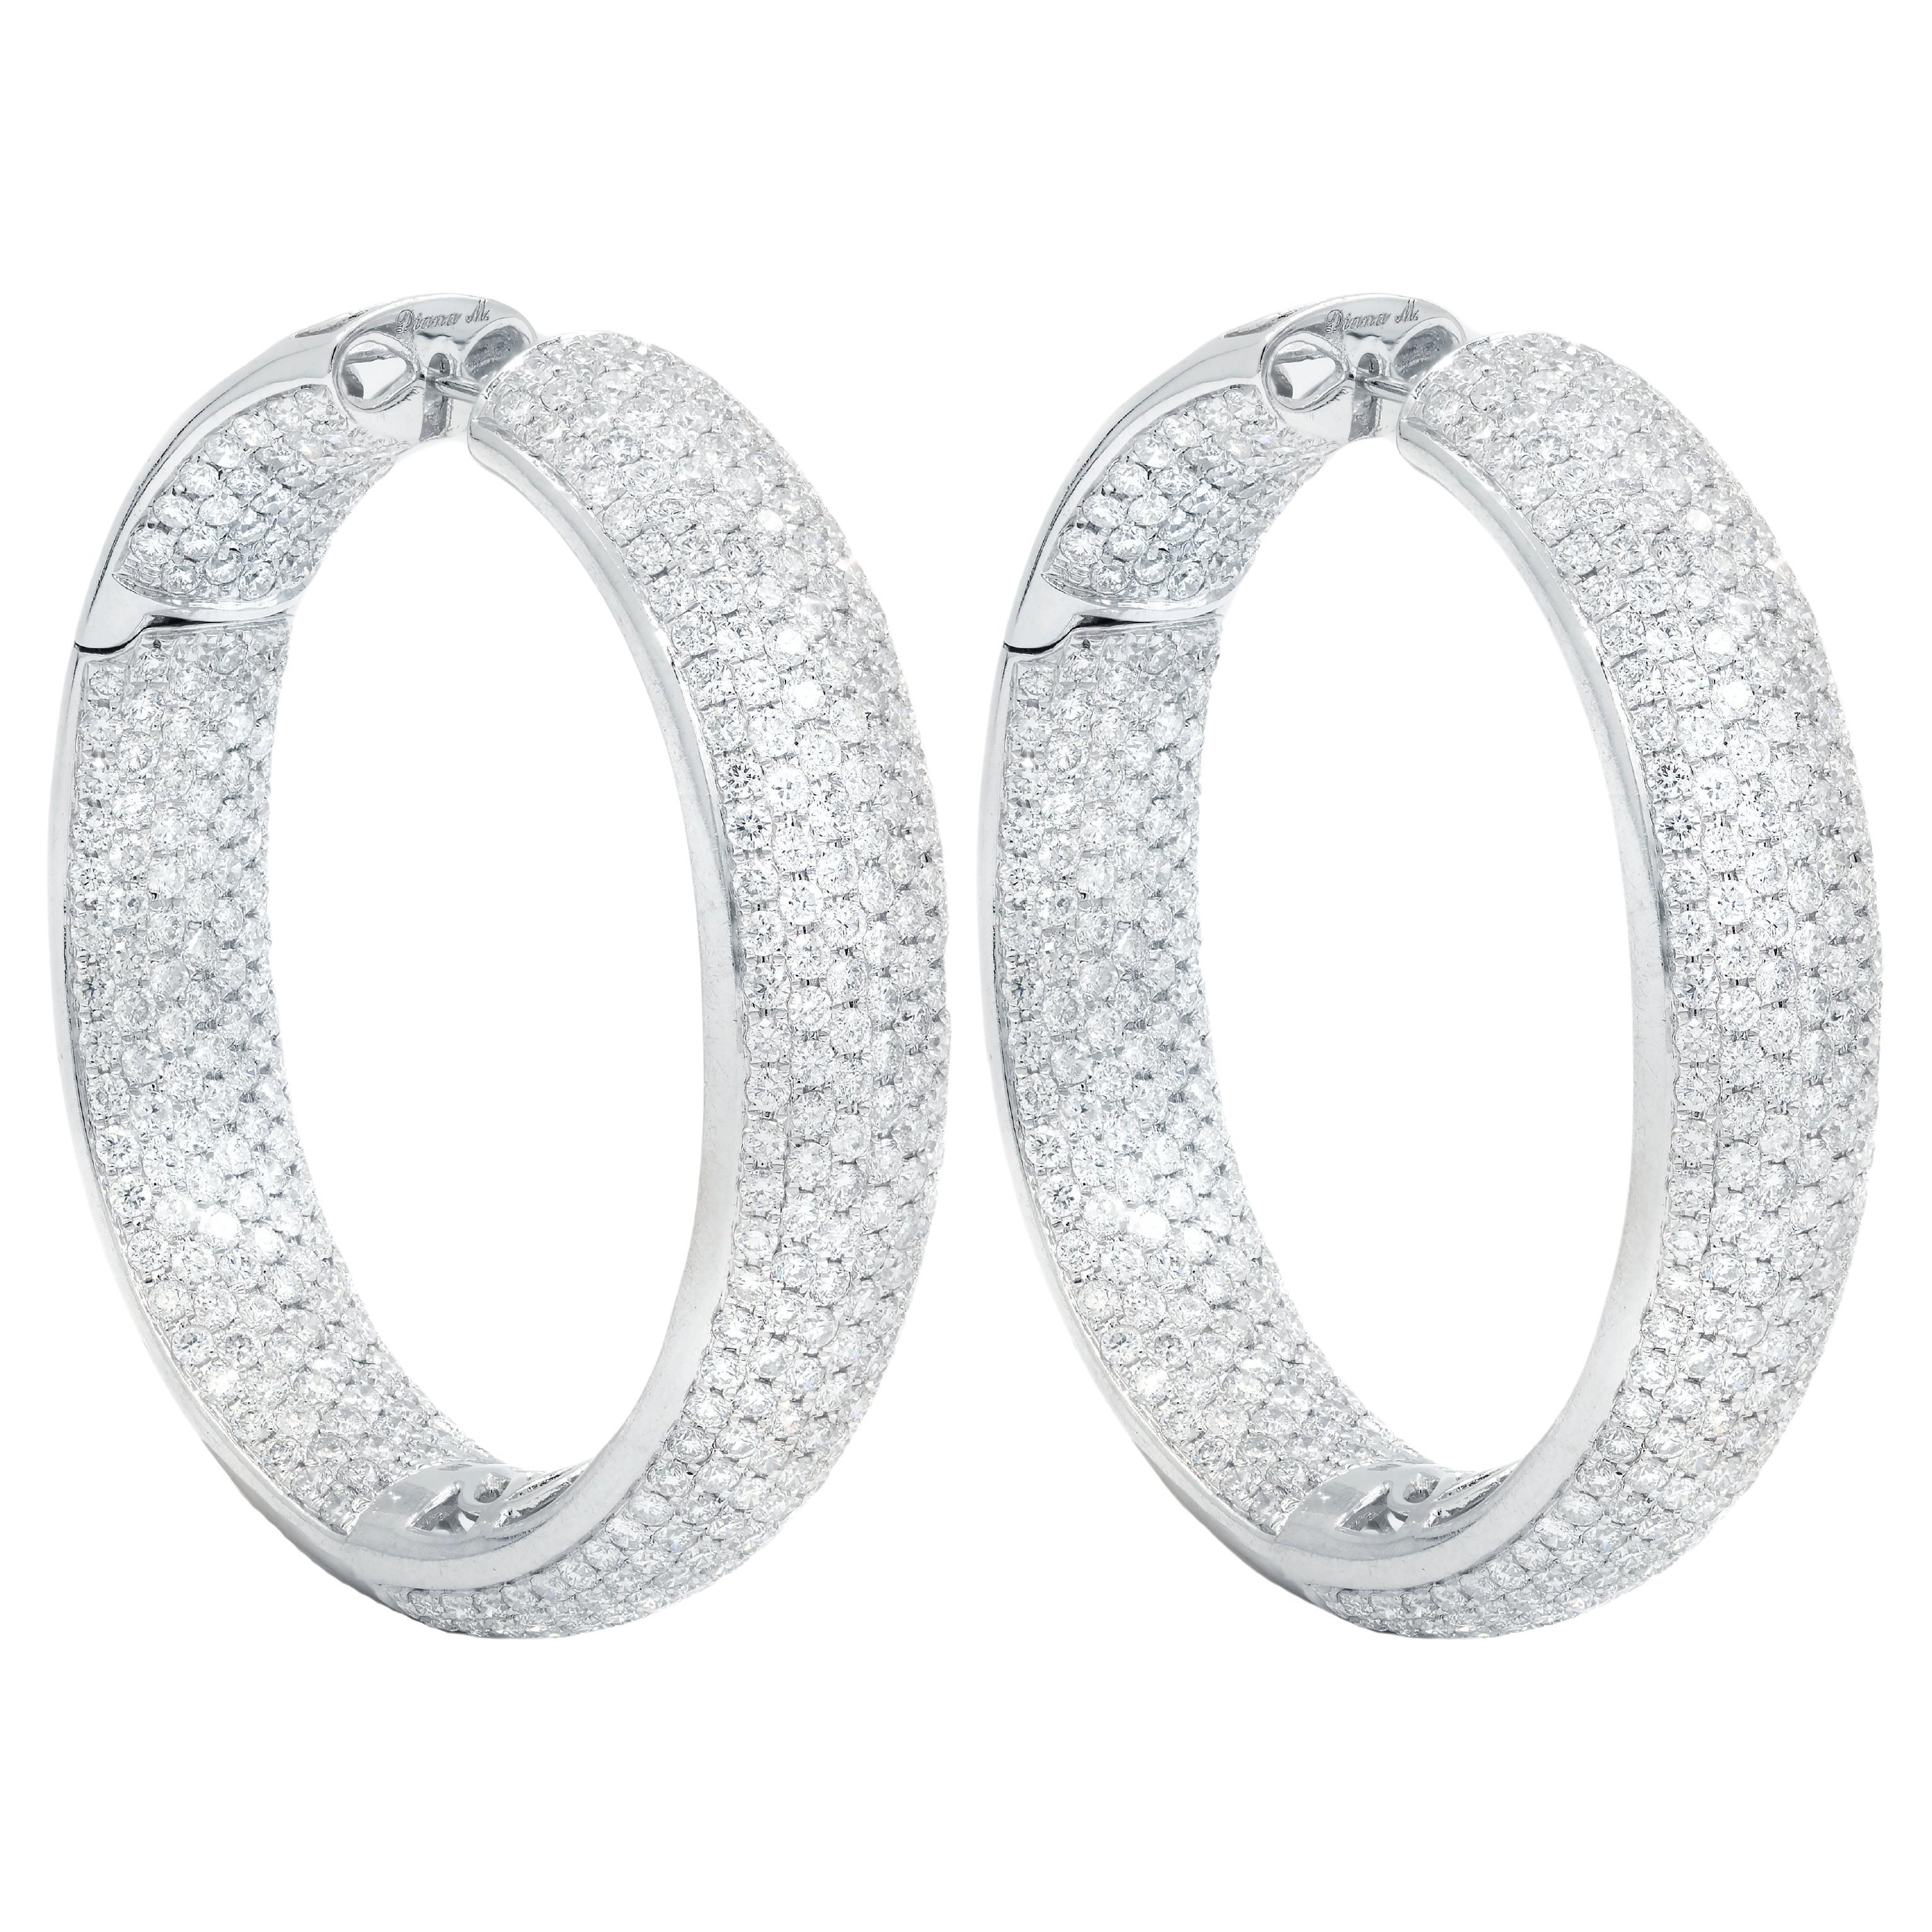 Diana M. 18 kt white gold inside-out hoop earrings adorned with 5 rows of 16.75 